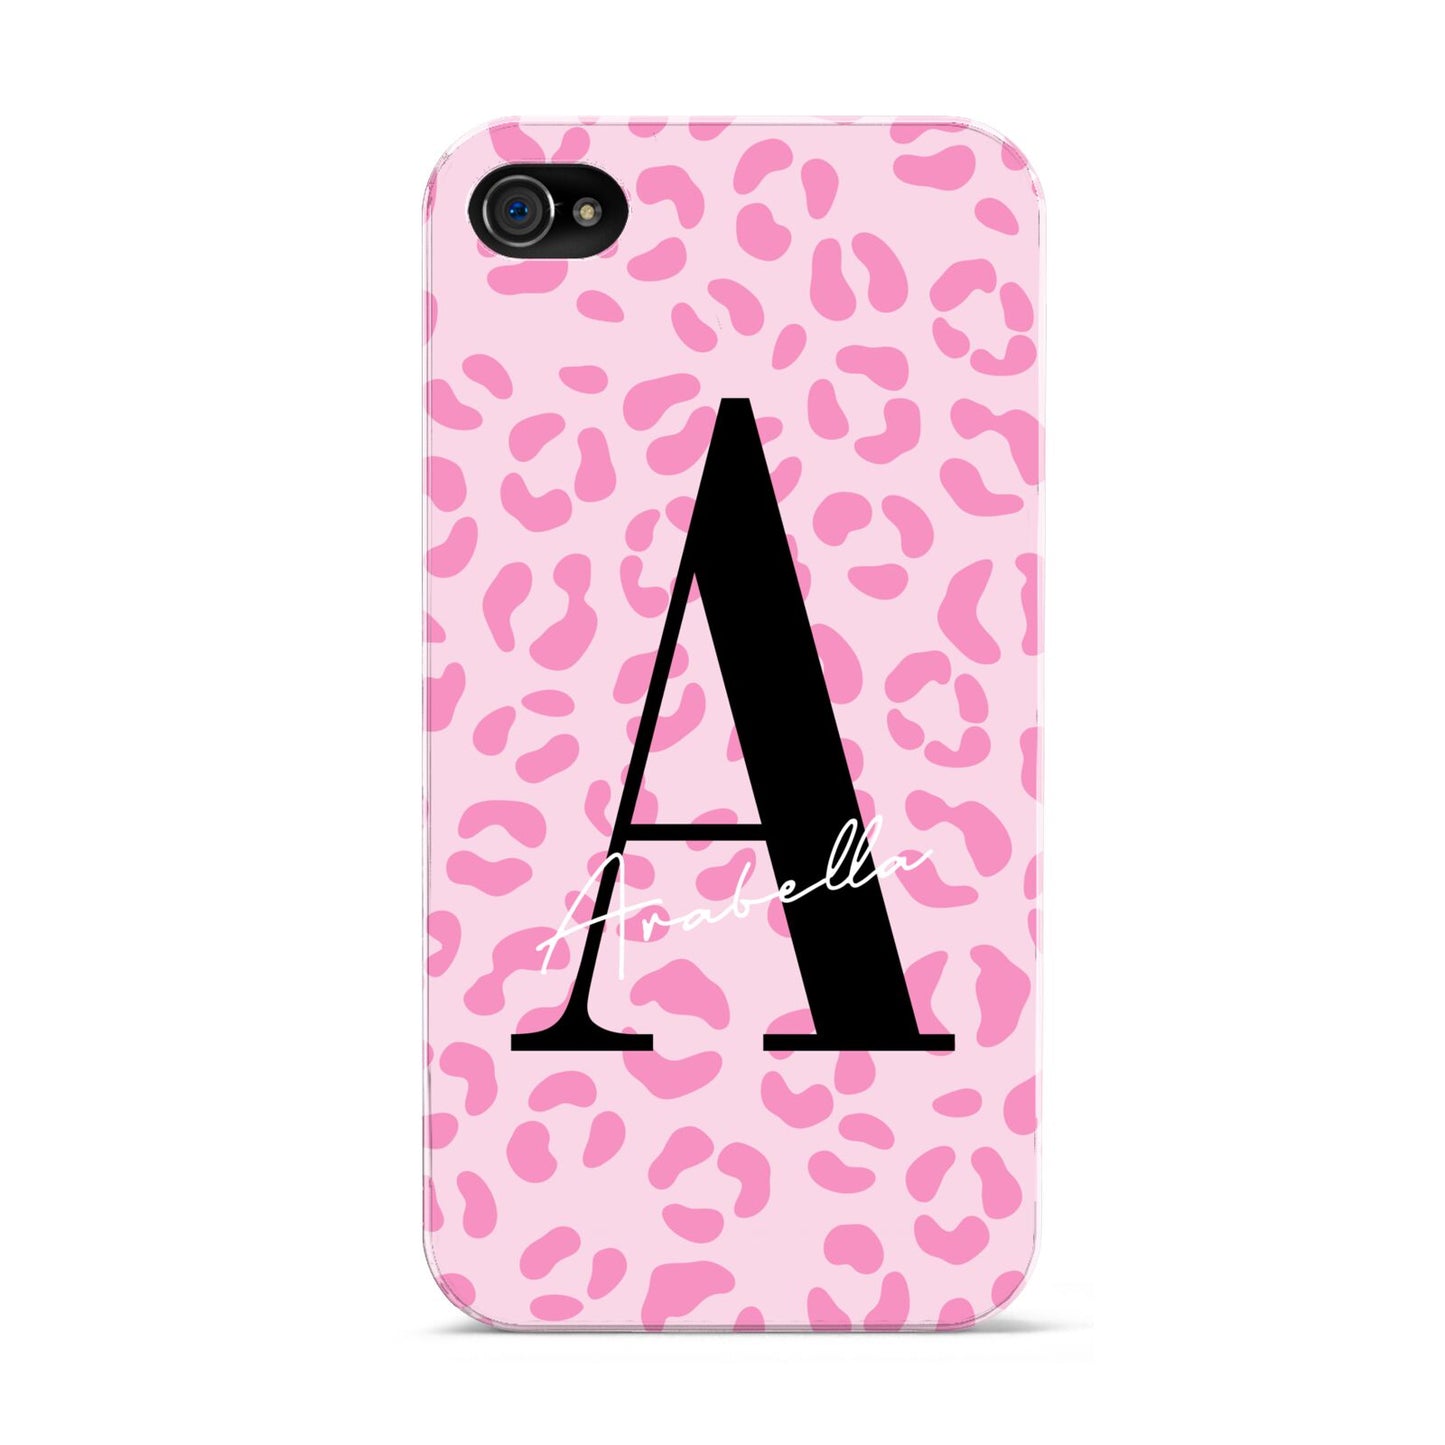 Personalised Pink Leopard Print Apple iPhone 4s Case